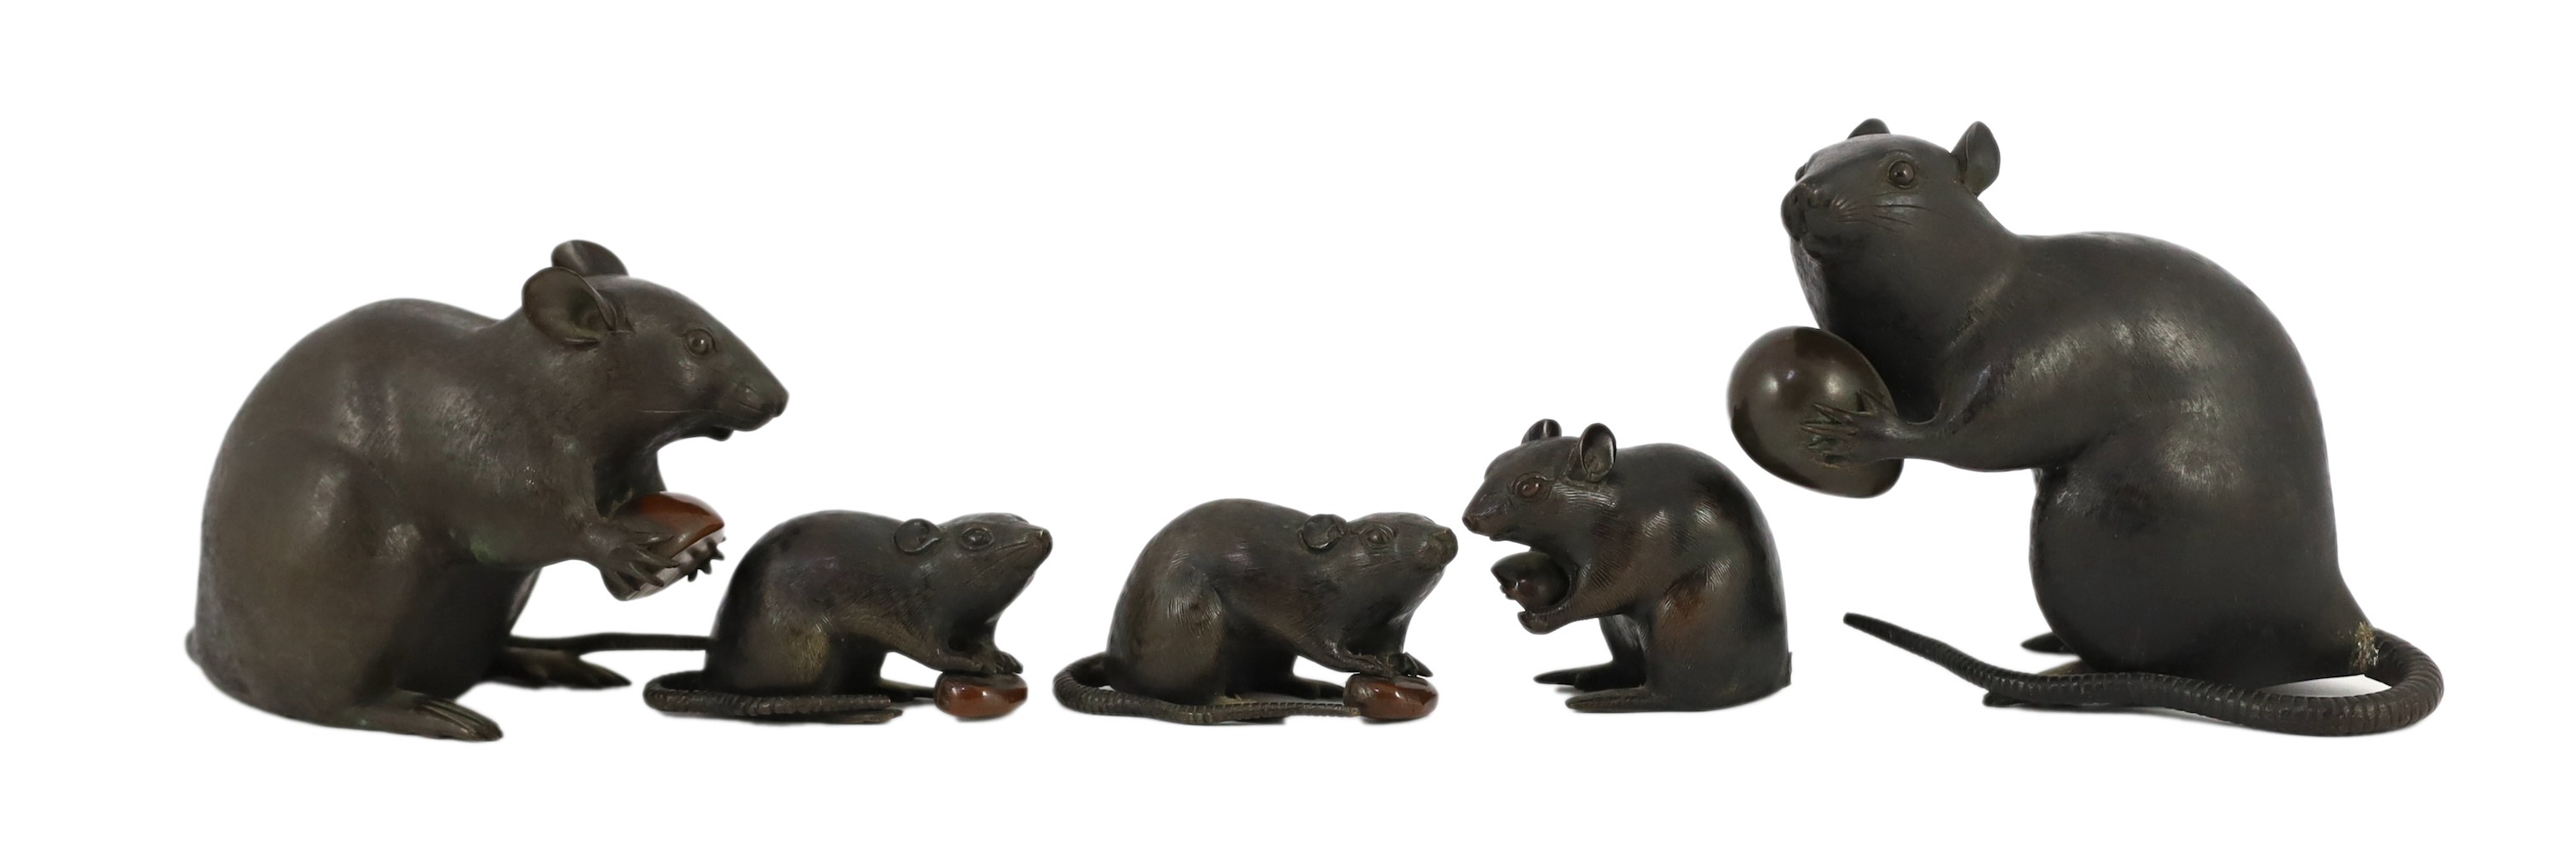 An assembled group of five Japanese bronze and mixed metal models of rats, Meiji period, smallest 9.5cm long, largest 16.5cm long, one small rat tail detached